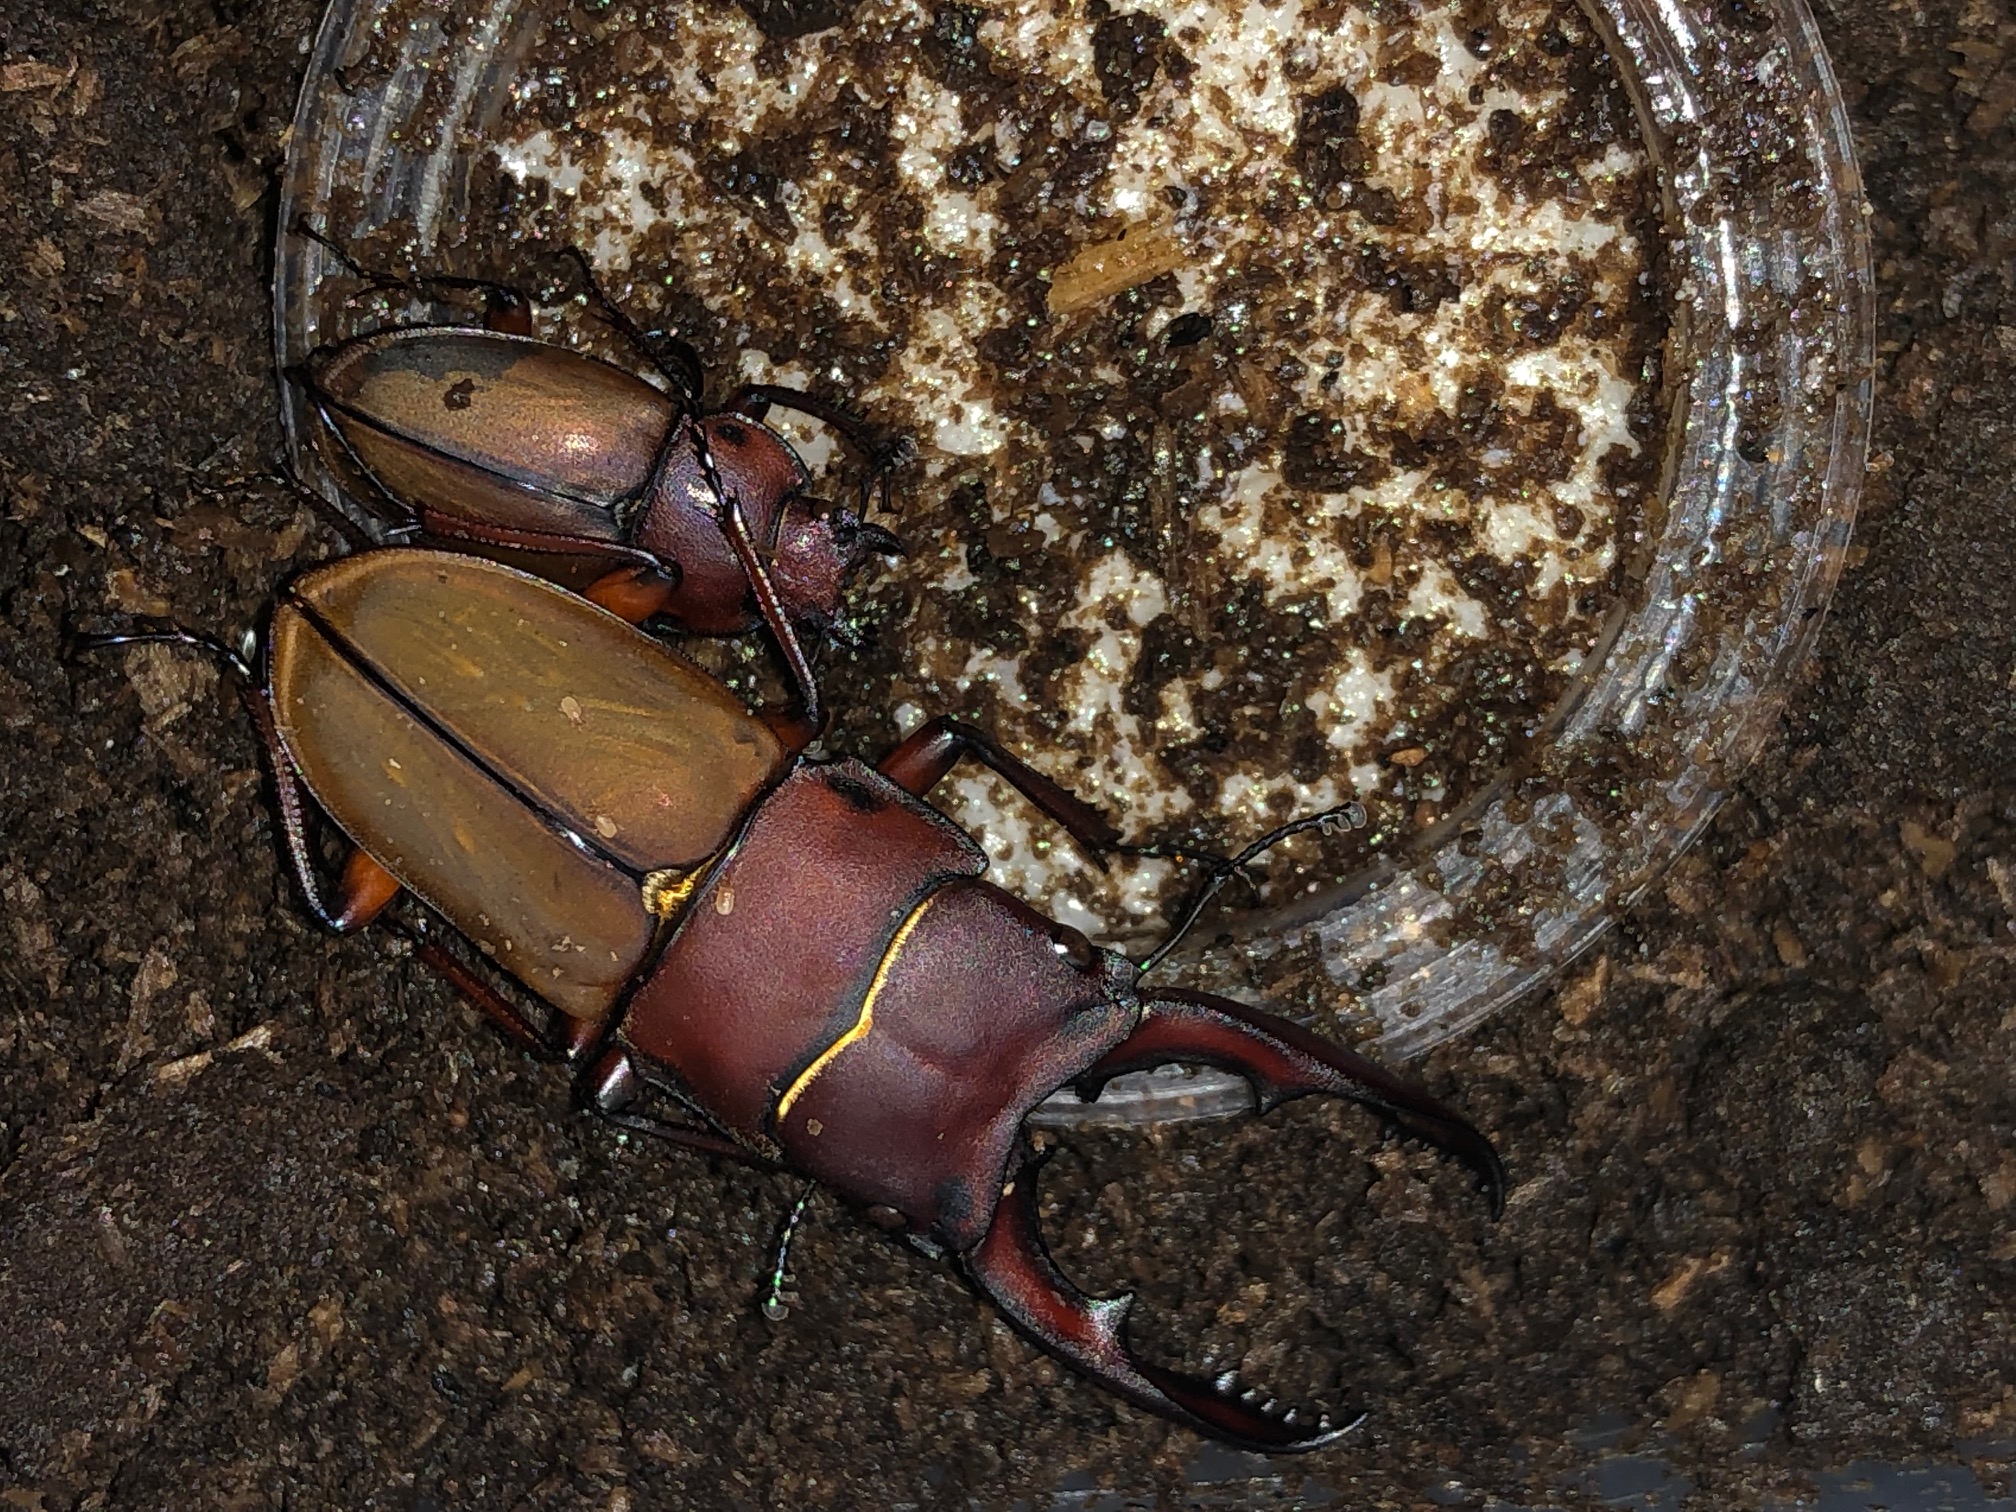 Image of a male of the next generation of Leptinopterus burmeisteri